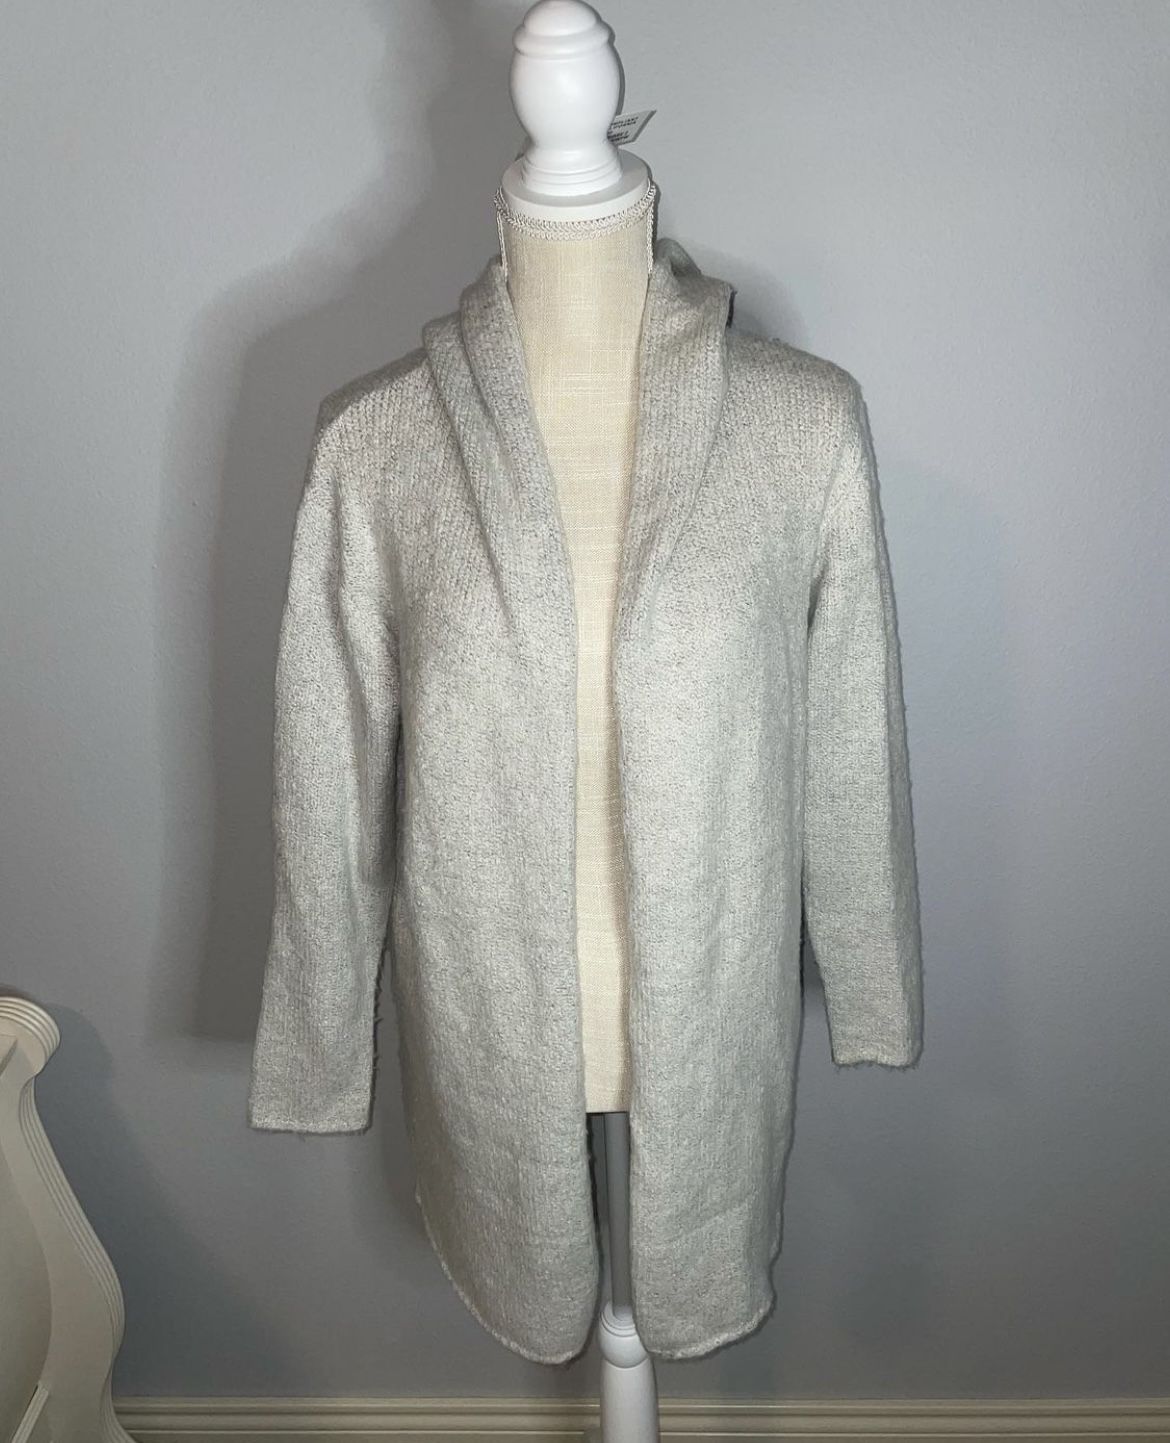 Women’s Brand New Cardigan with pockets and hood